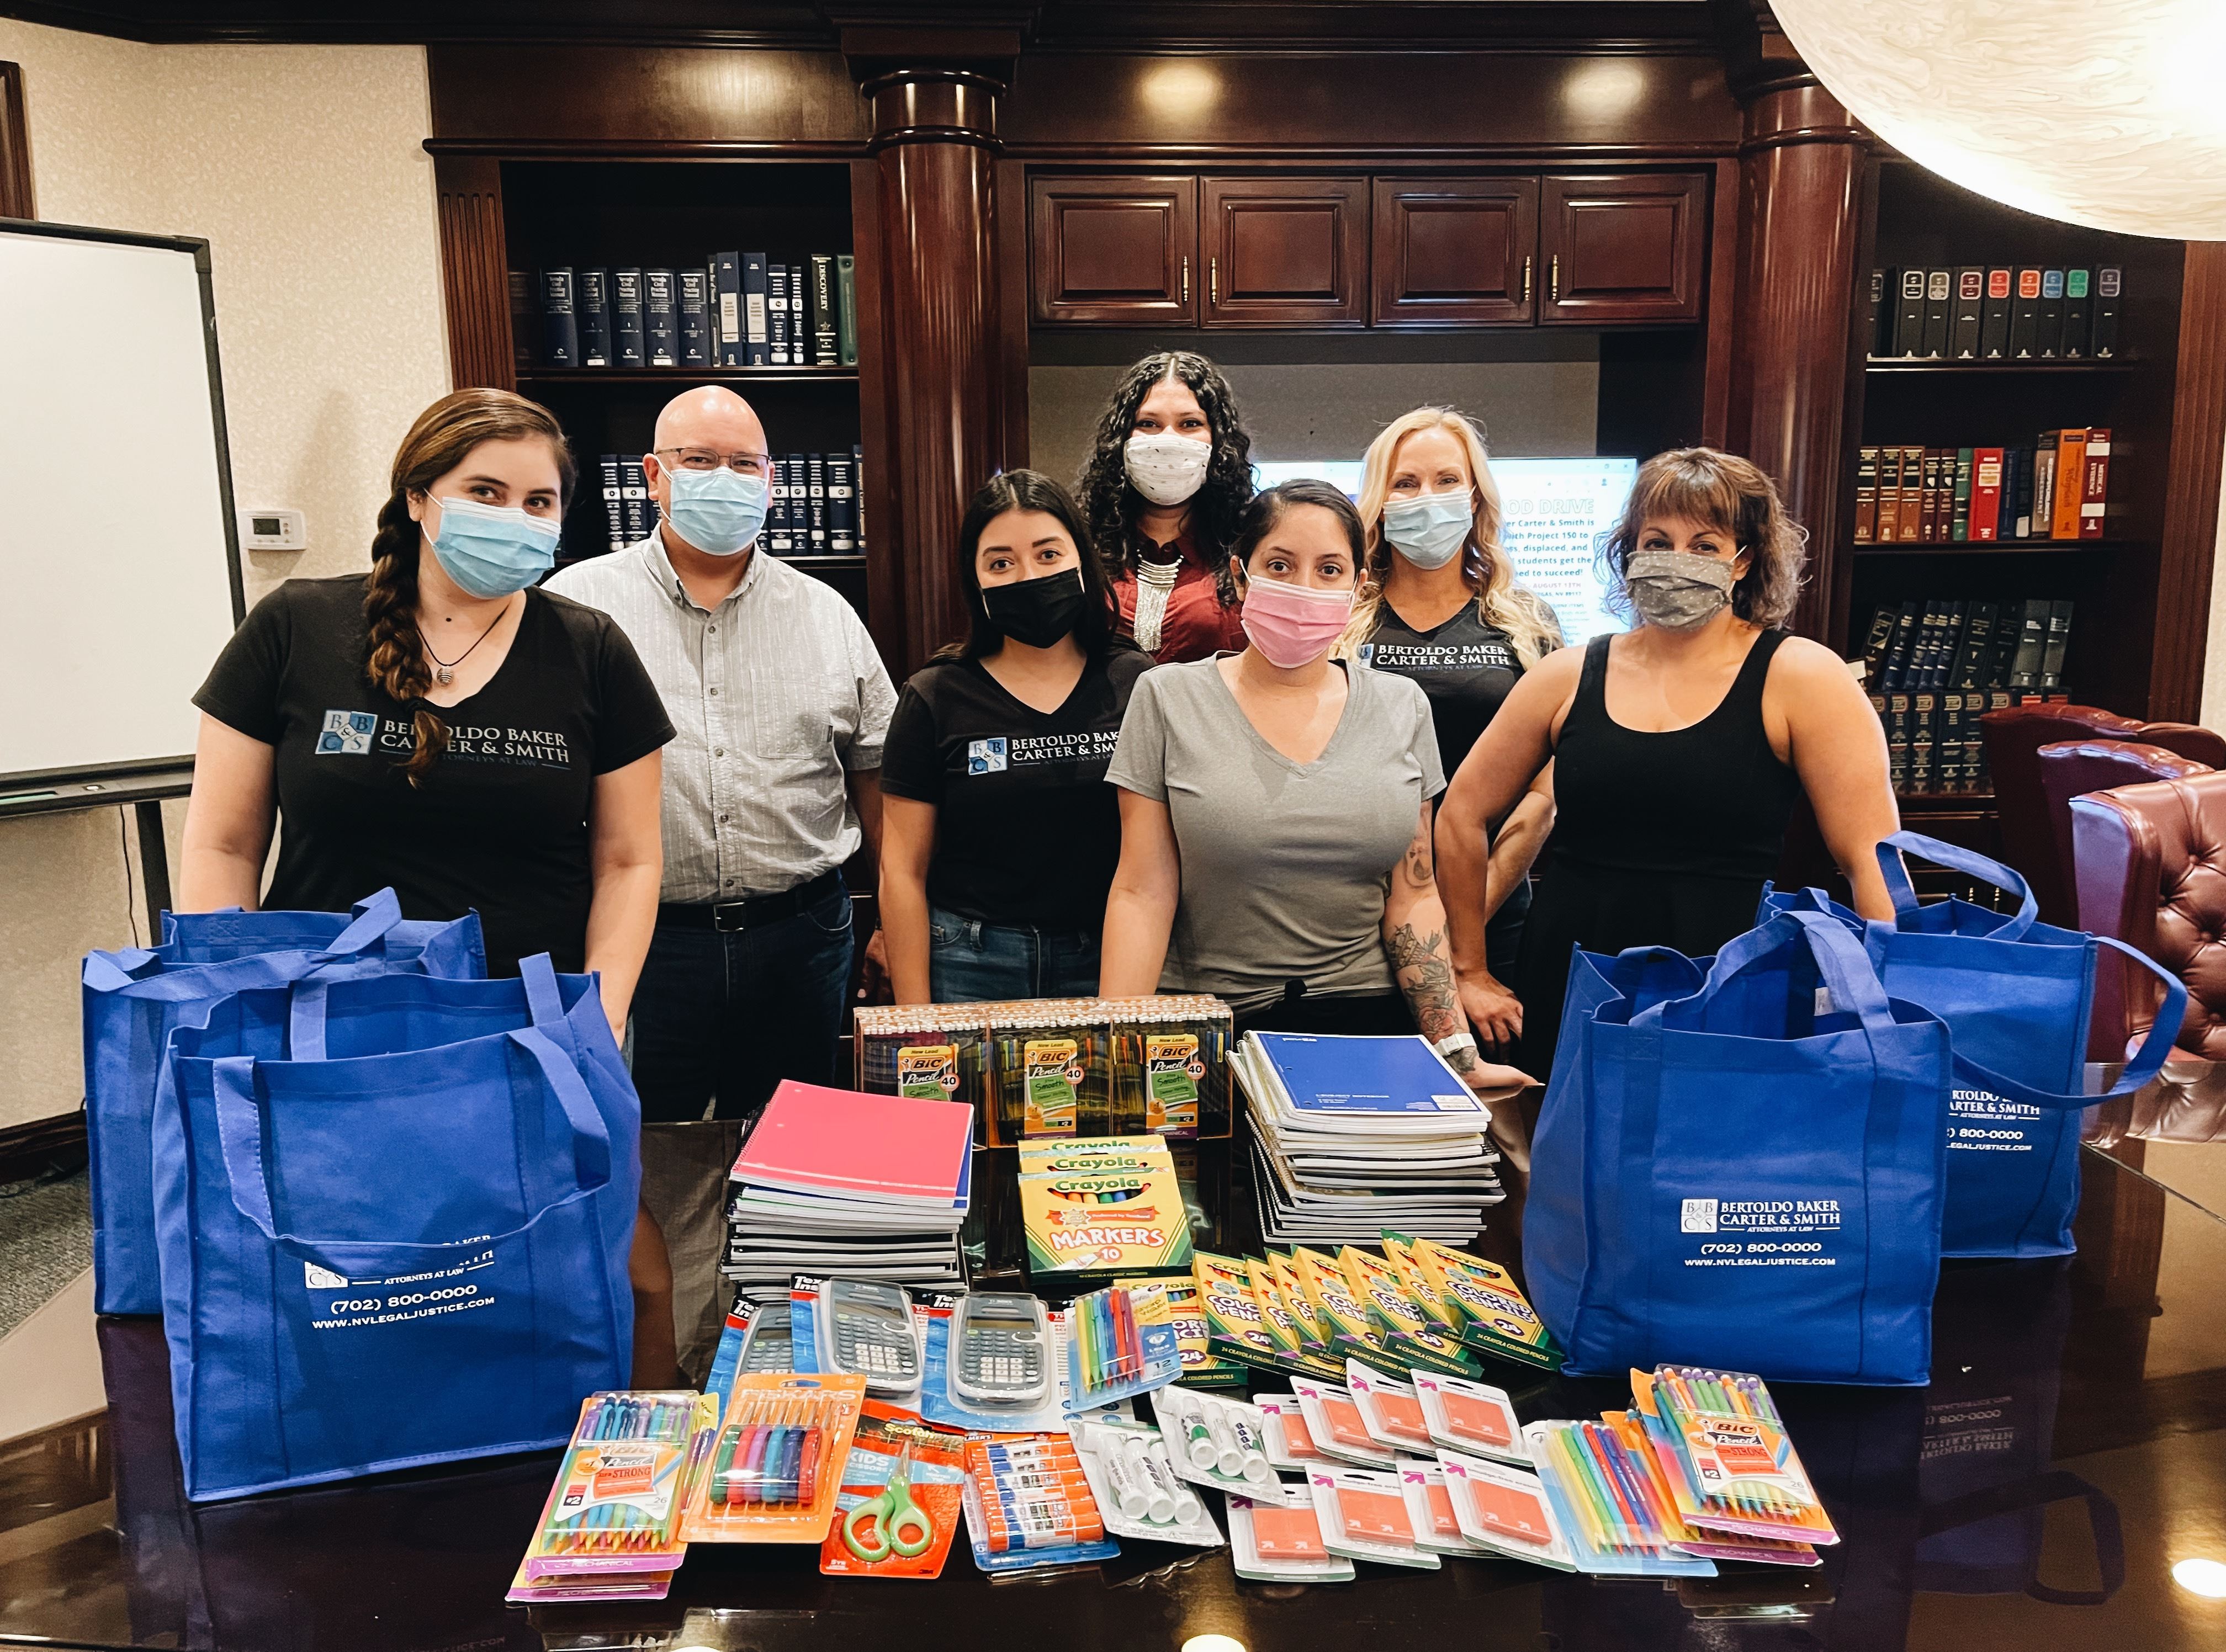 Picture of everyone at the firm who participated in the Local Back to School charity, standing in front of supplies such as paper, notebooks, markers, scissors, and glue sticks